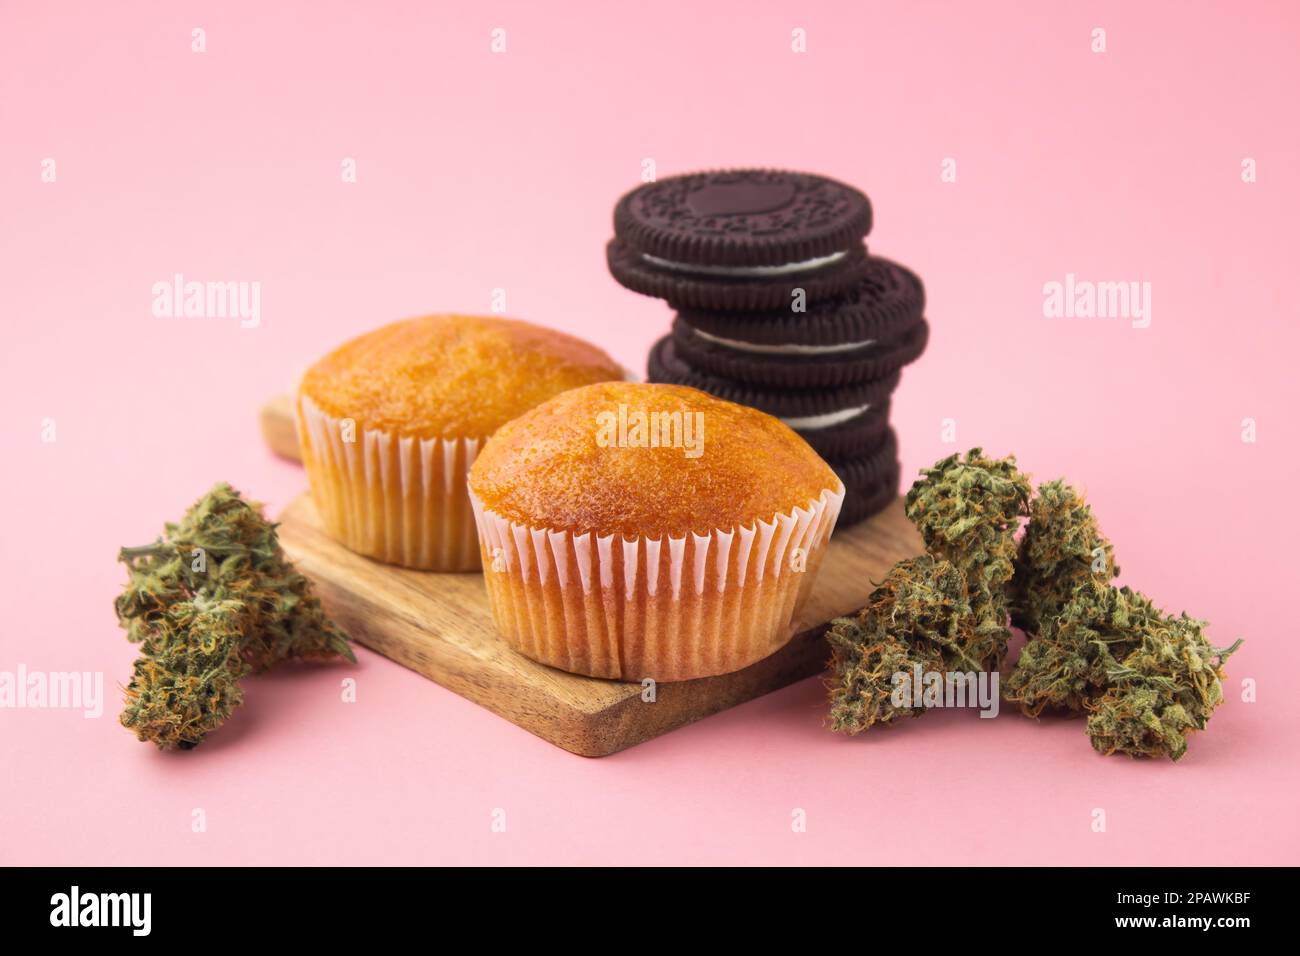 Cannabis cupcakes and chocolate chip cookies on a wooden board, dry marijuana buds on the sides.  On a pink background Stock Photo